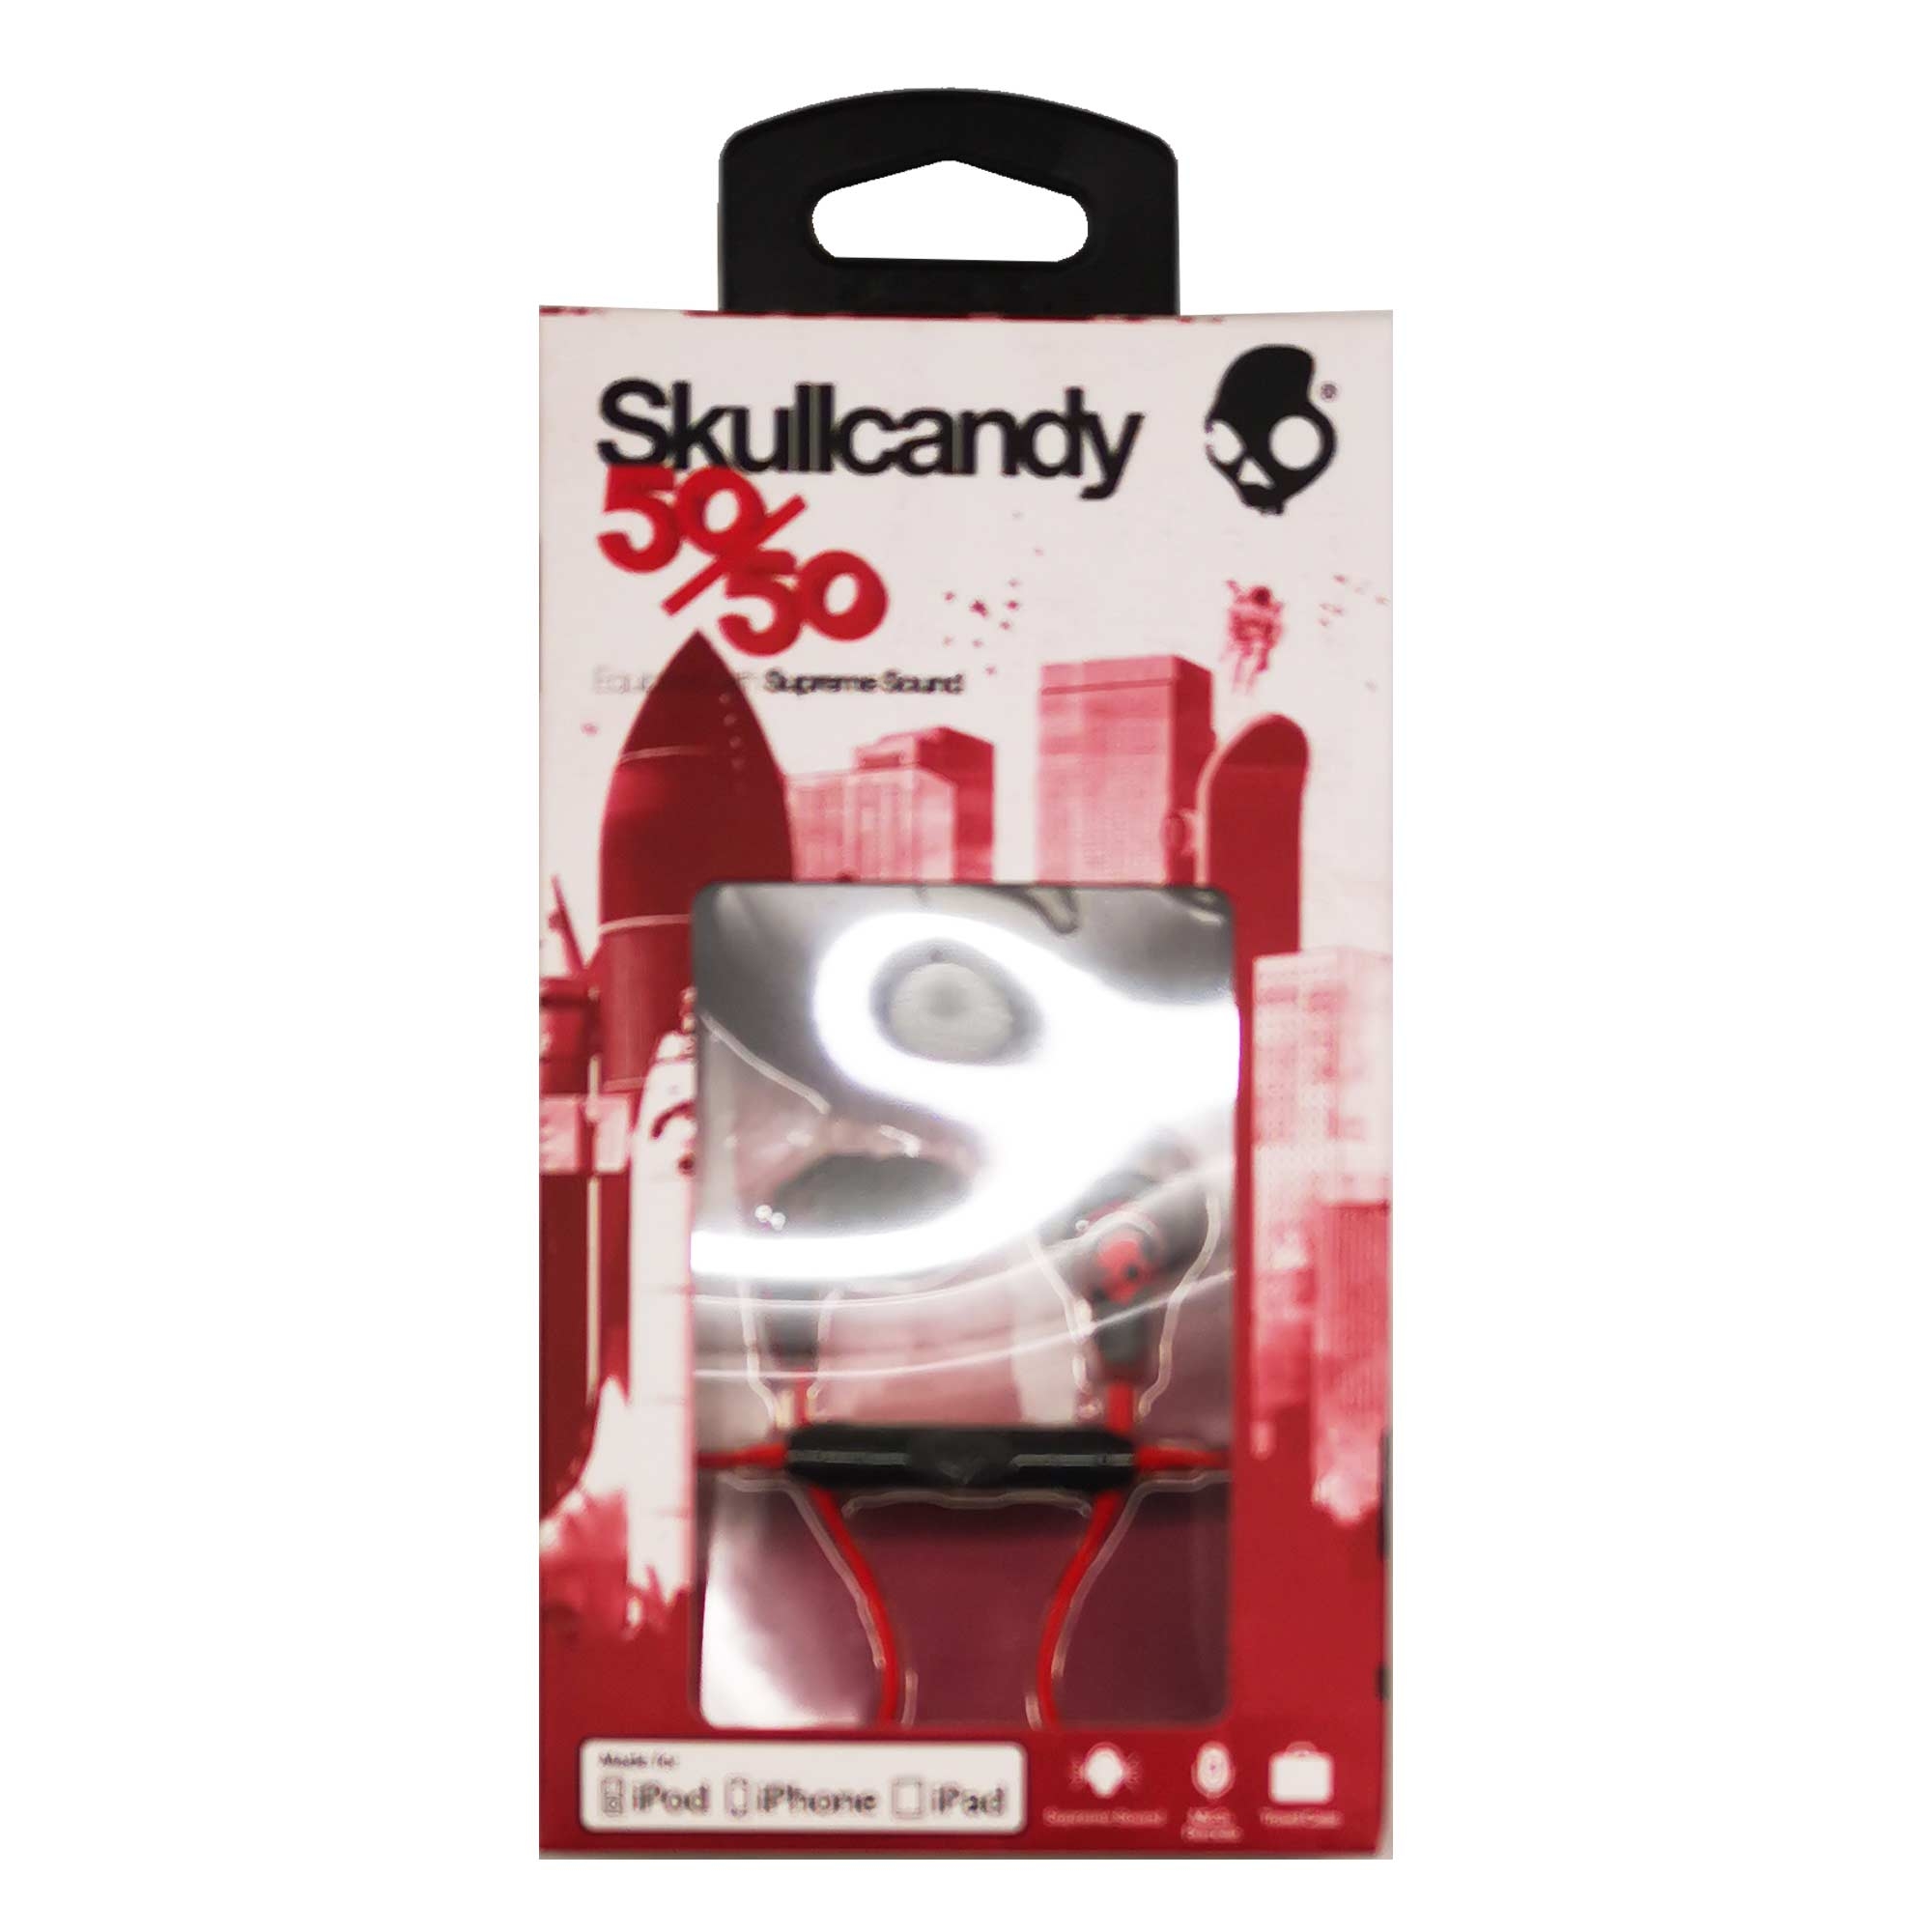 LOUD Headphone SKULLCANDY with MICROPHONE, spaced out-clear-after burner maroon